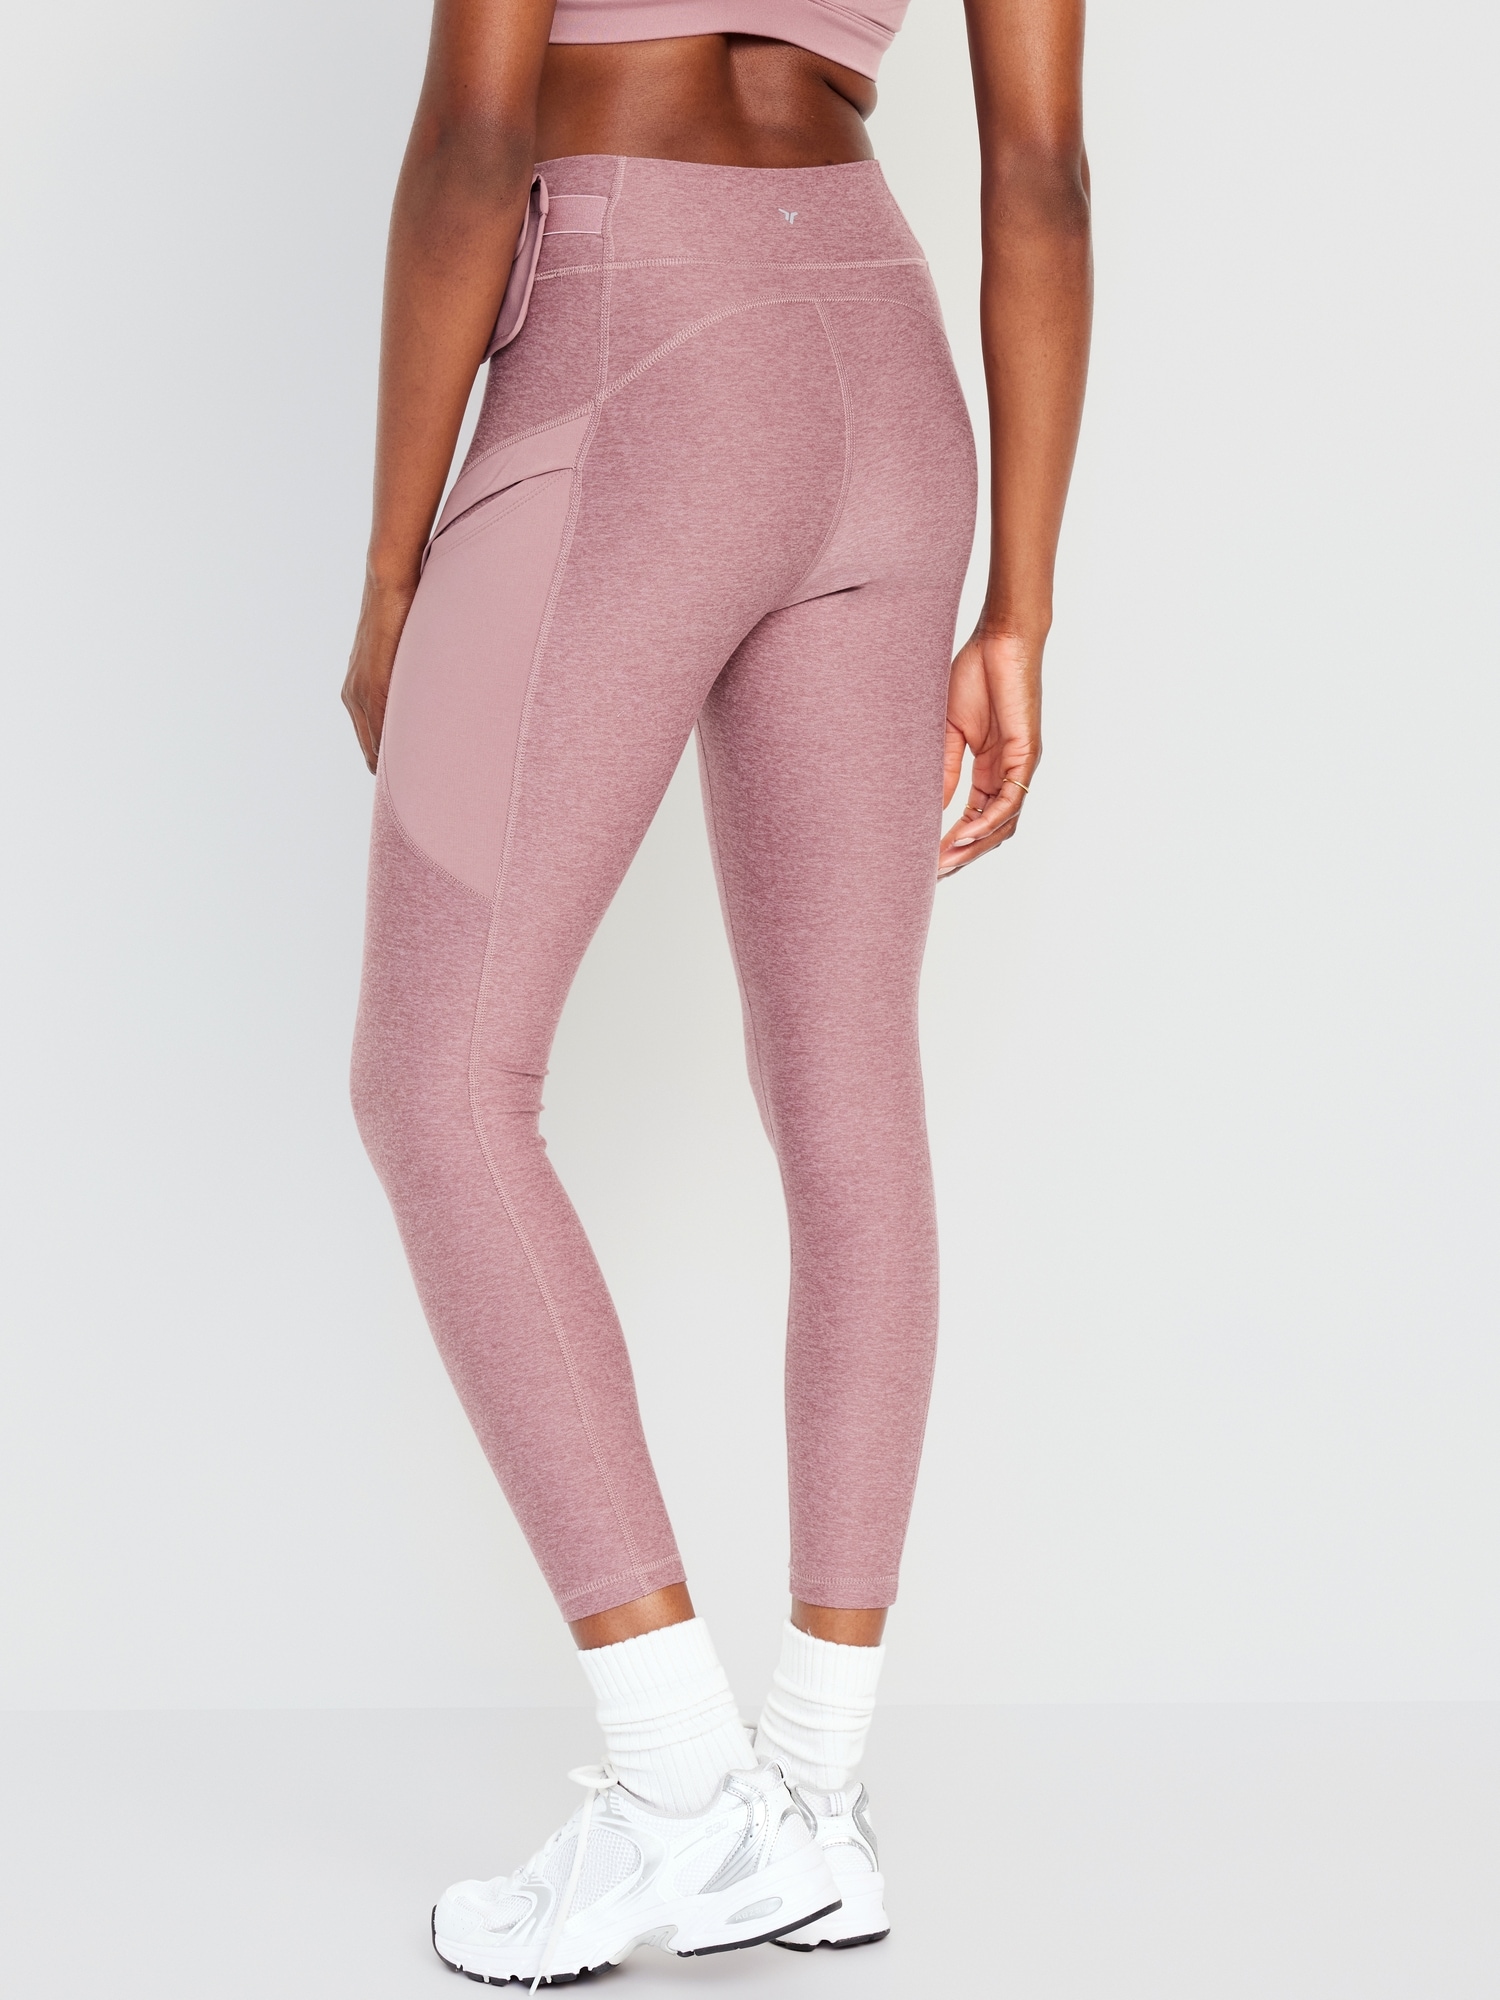 Yes, these Old Navy activewear leggings are worth the hype